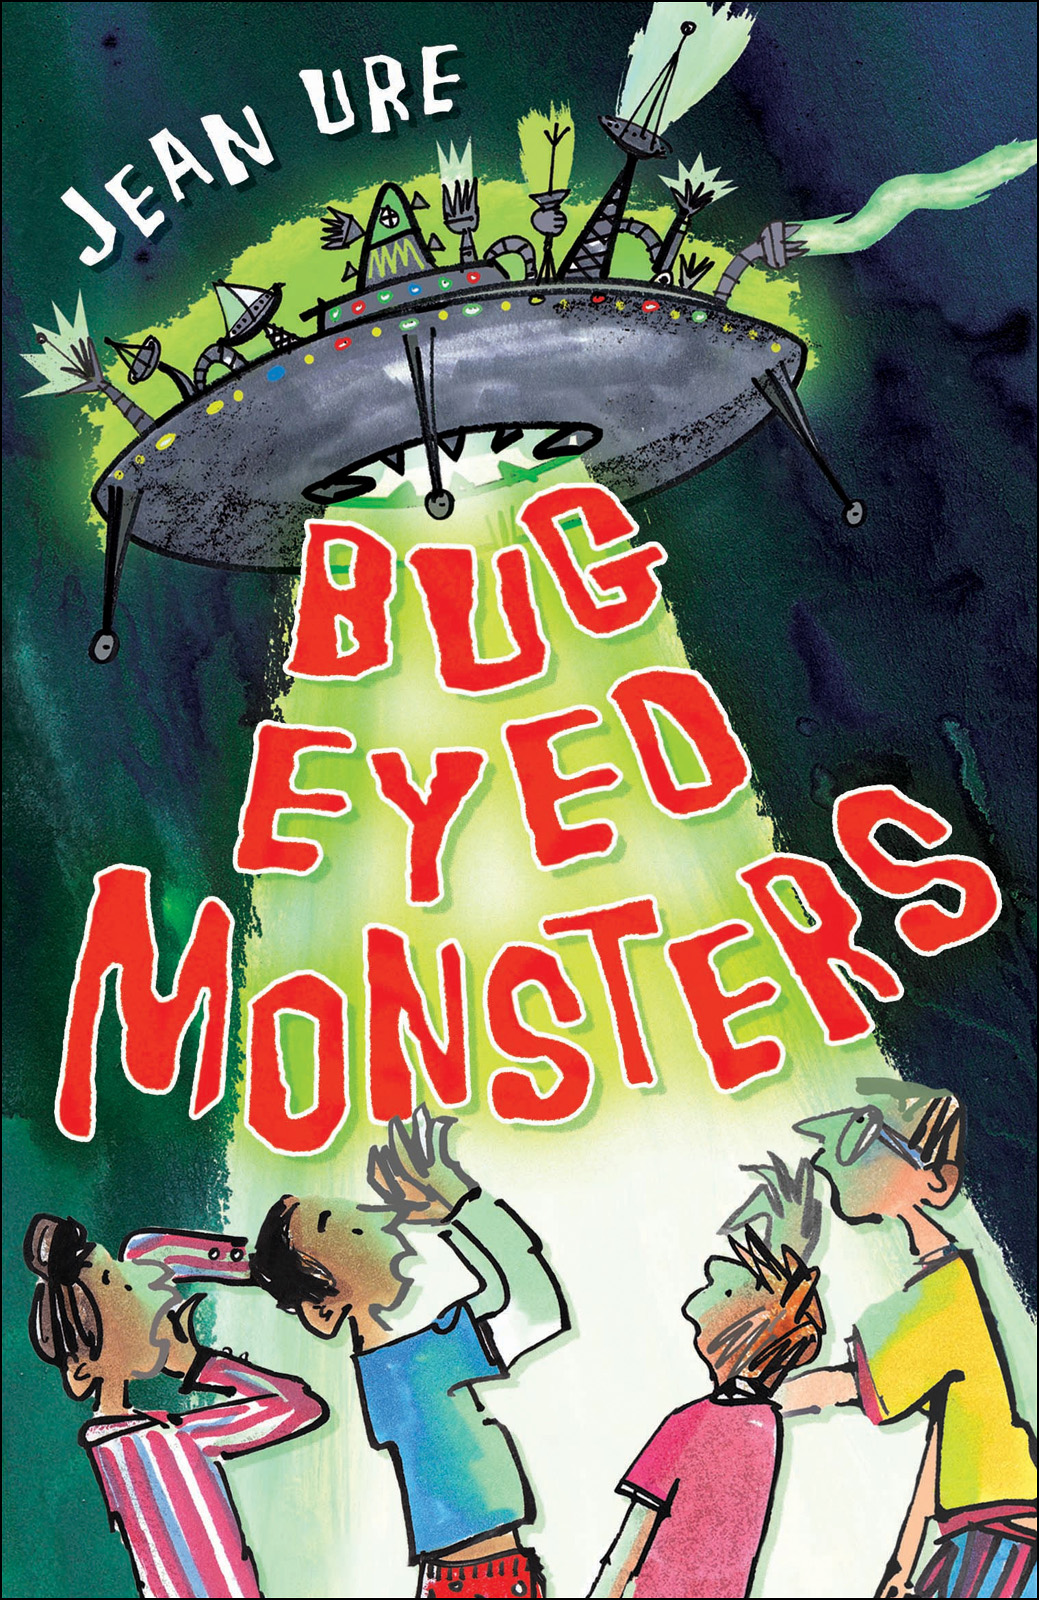 Bug Eyed Monsters (2012) by Jean Ure